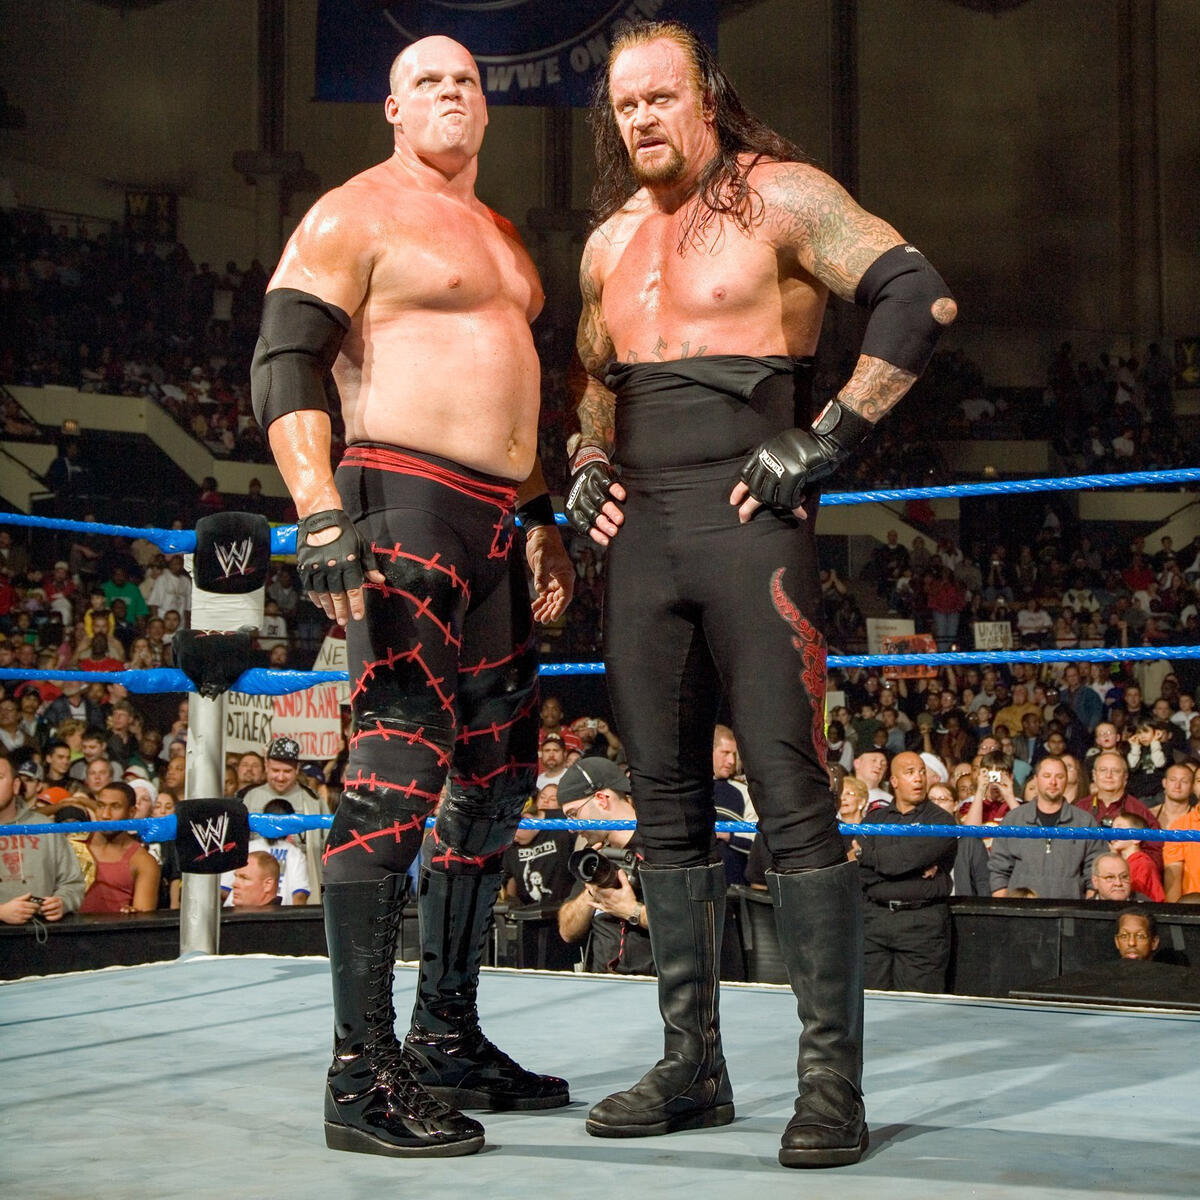 Wwe Undertaker And Kane Brothers Of Destruction